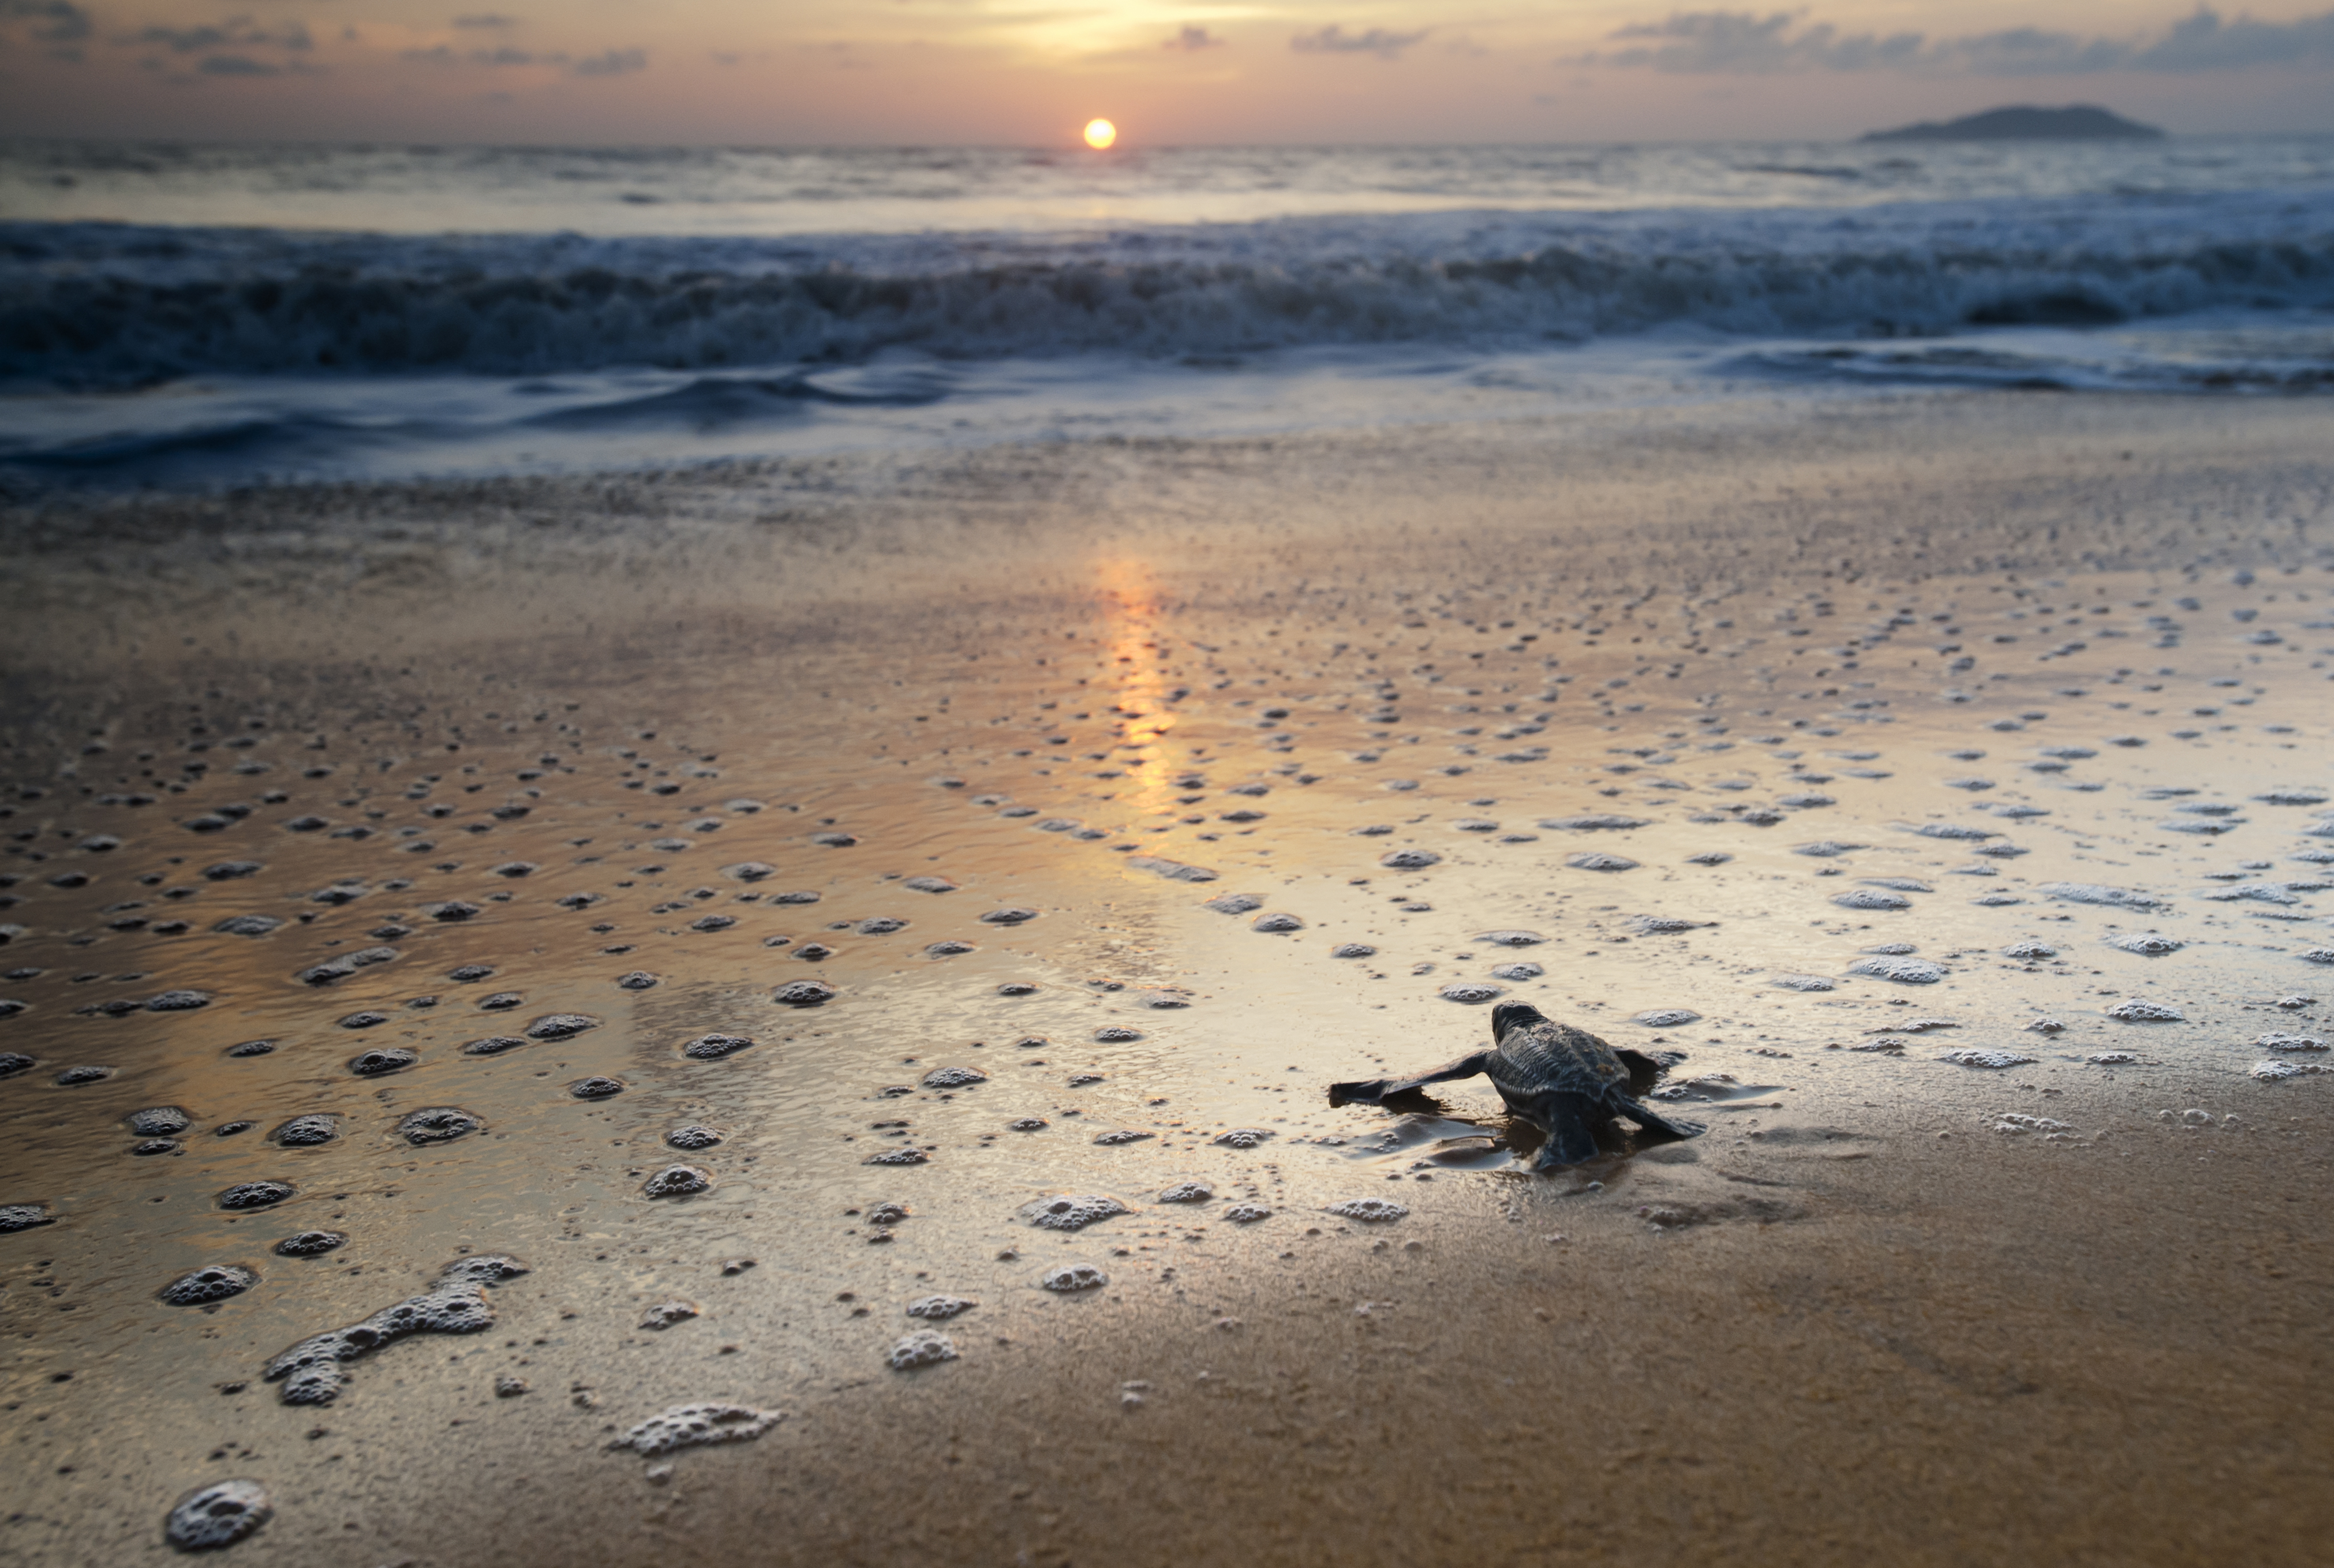 Leatherback Turtle Hatchling on a beach